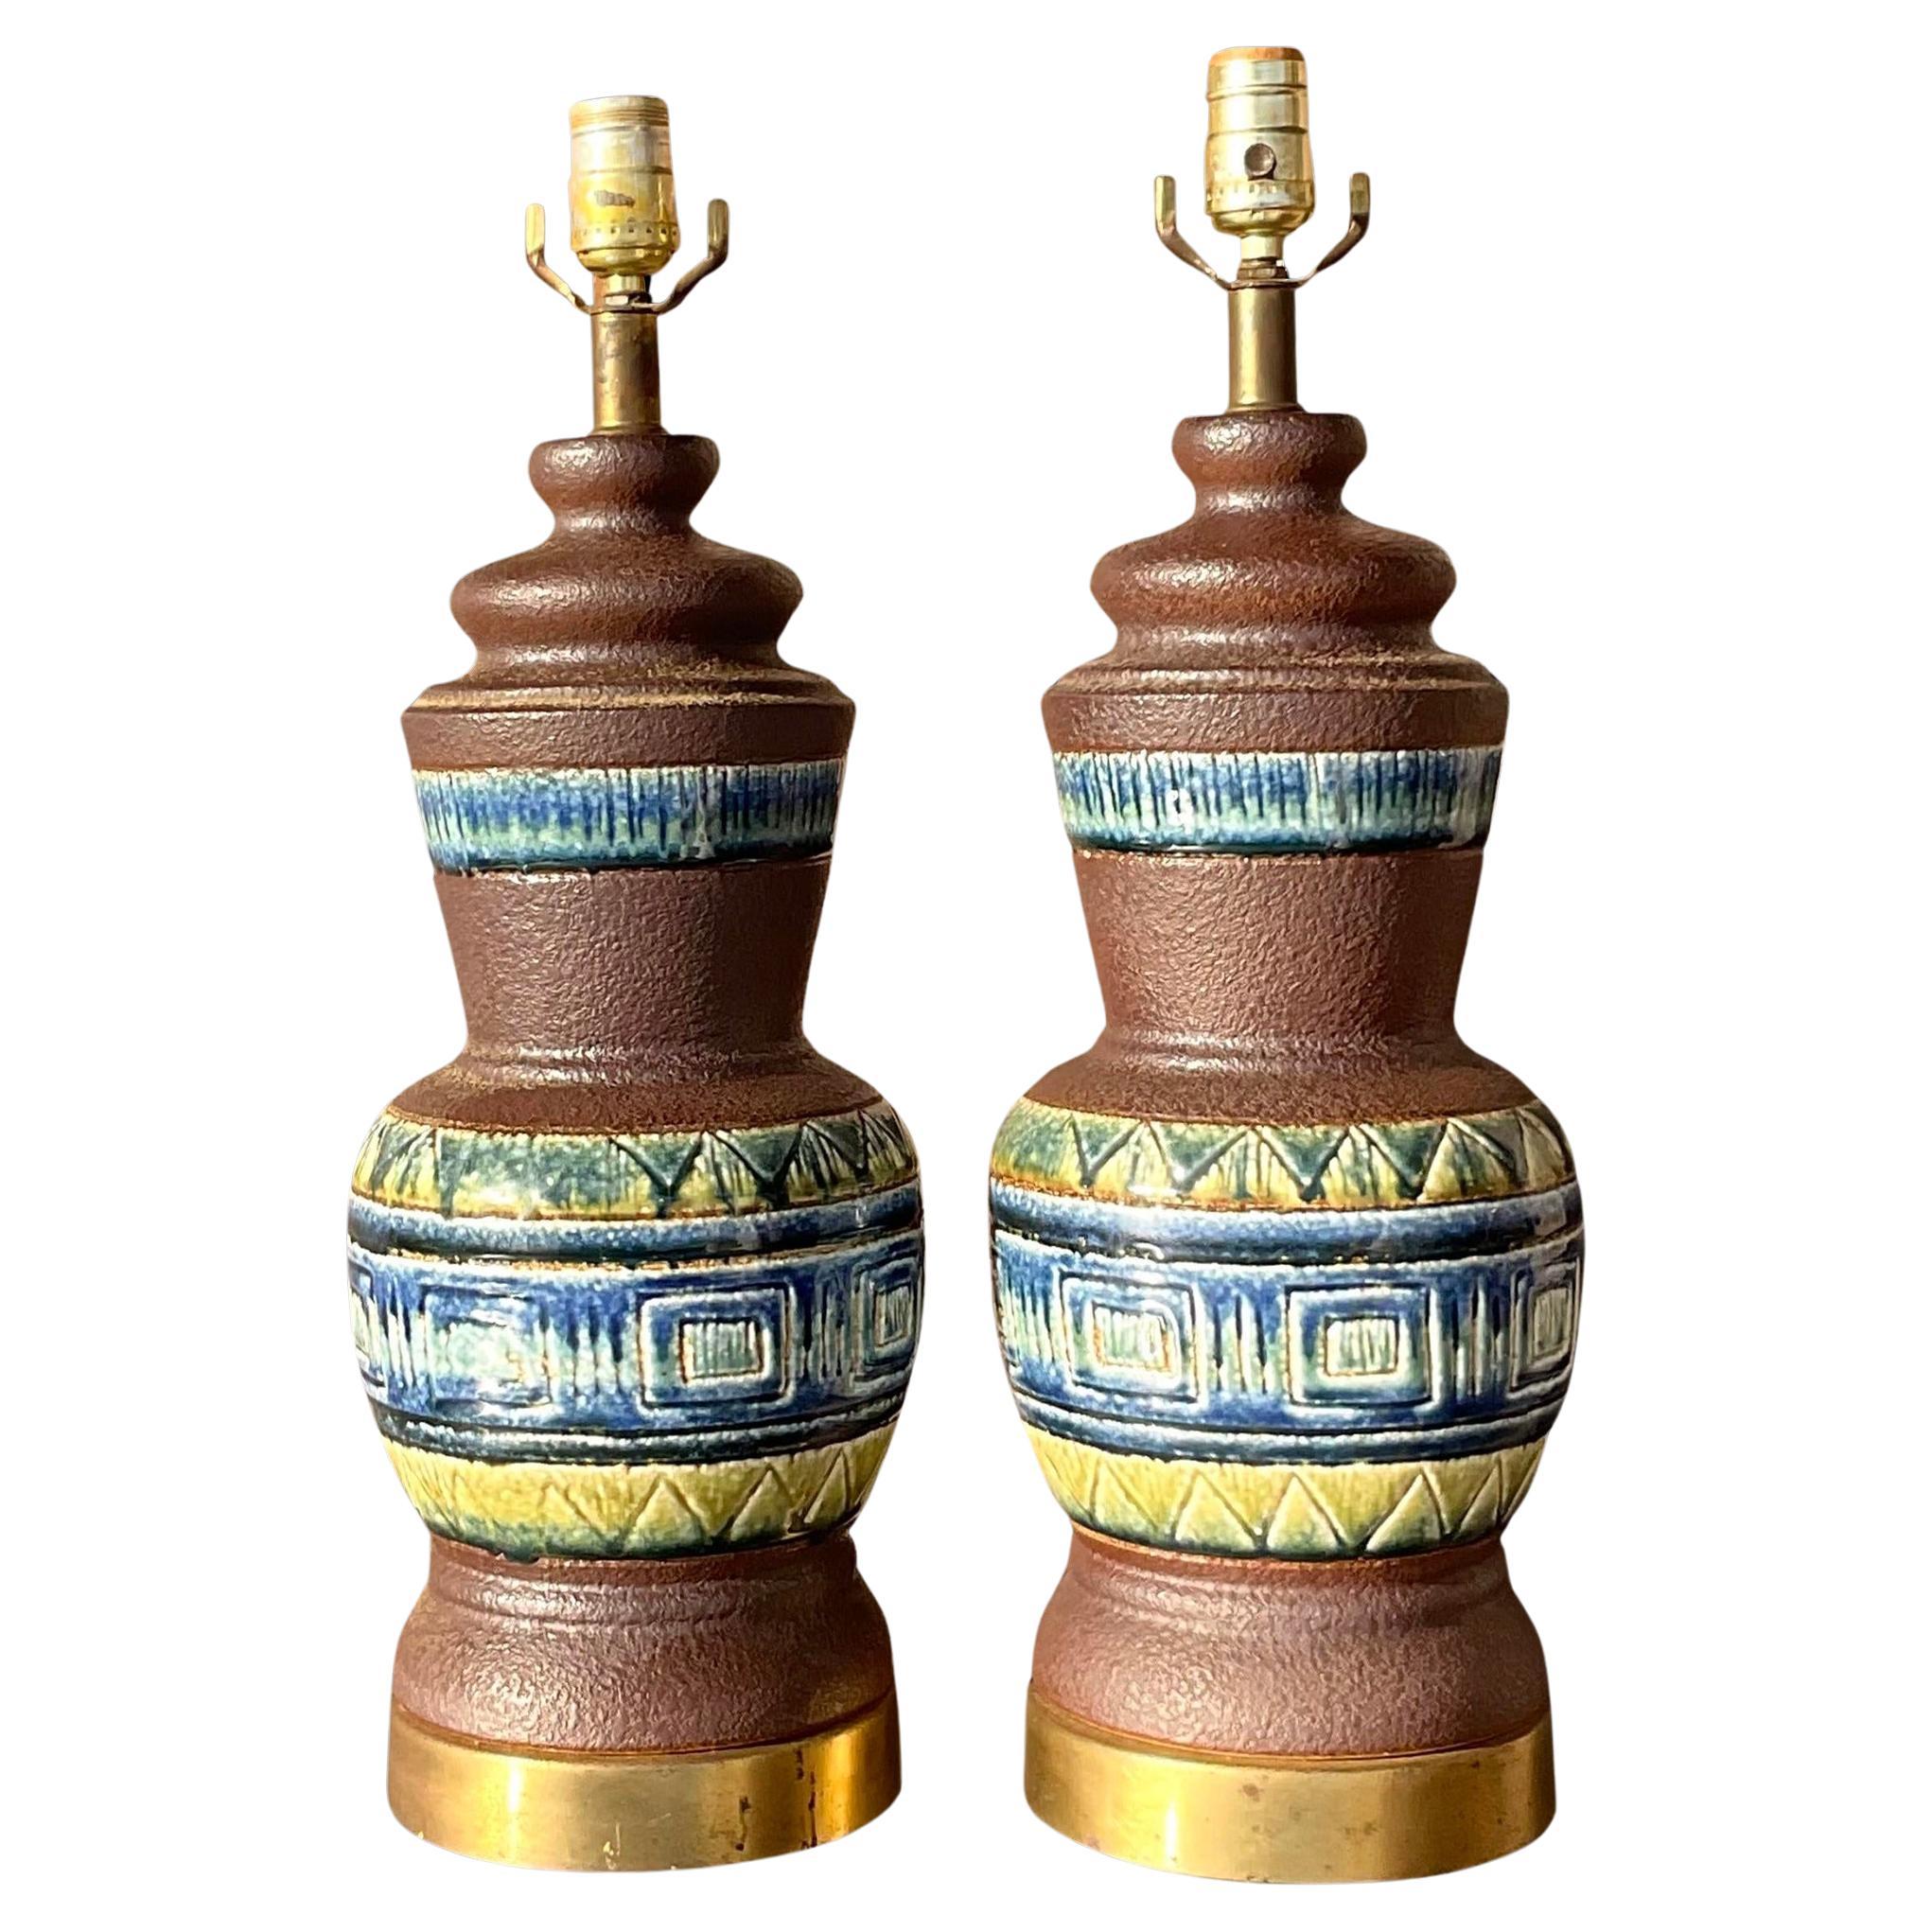 Vintage Mid 20th Century Glazed Ceramic Band Table Lamps - a Pair For Sale